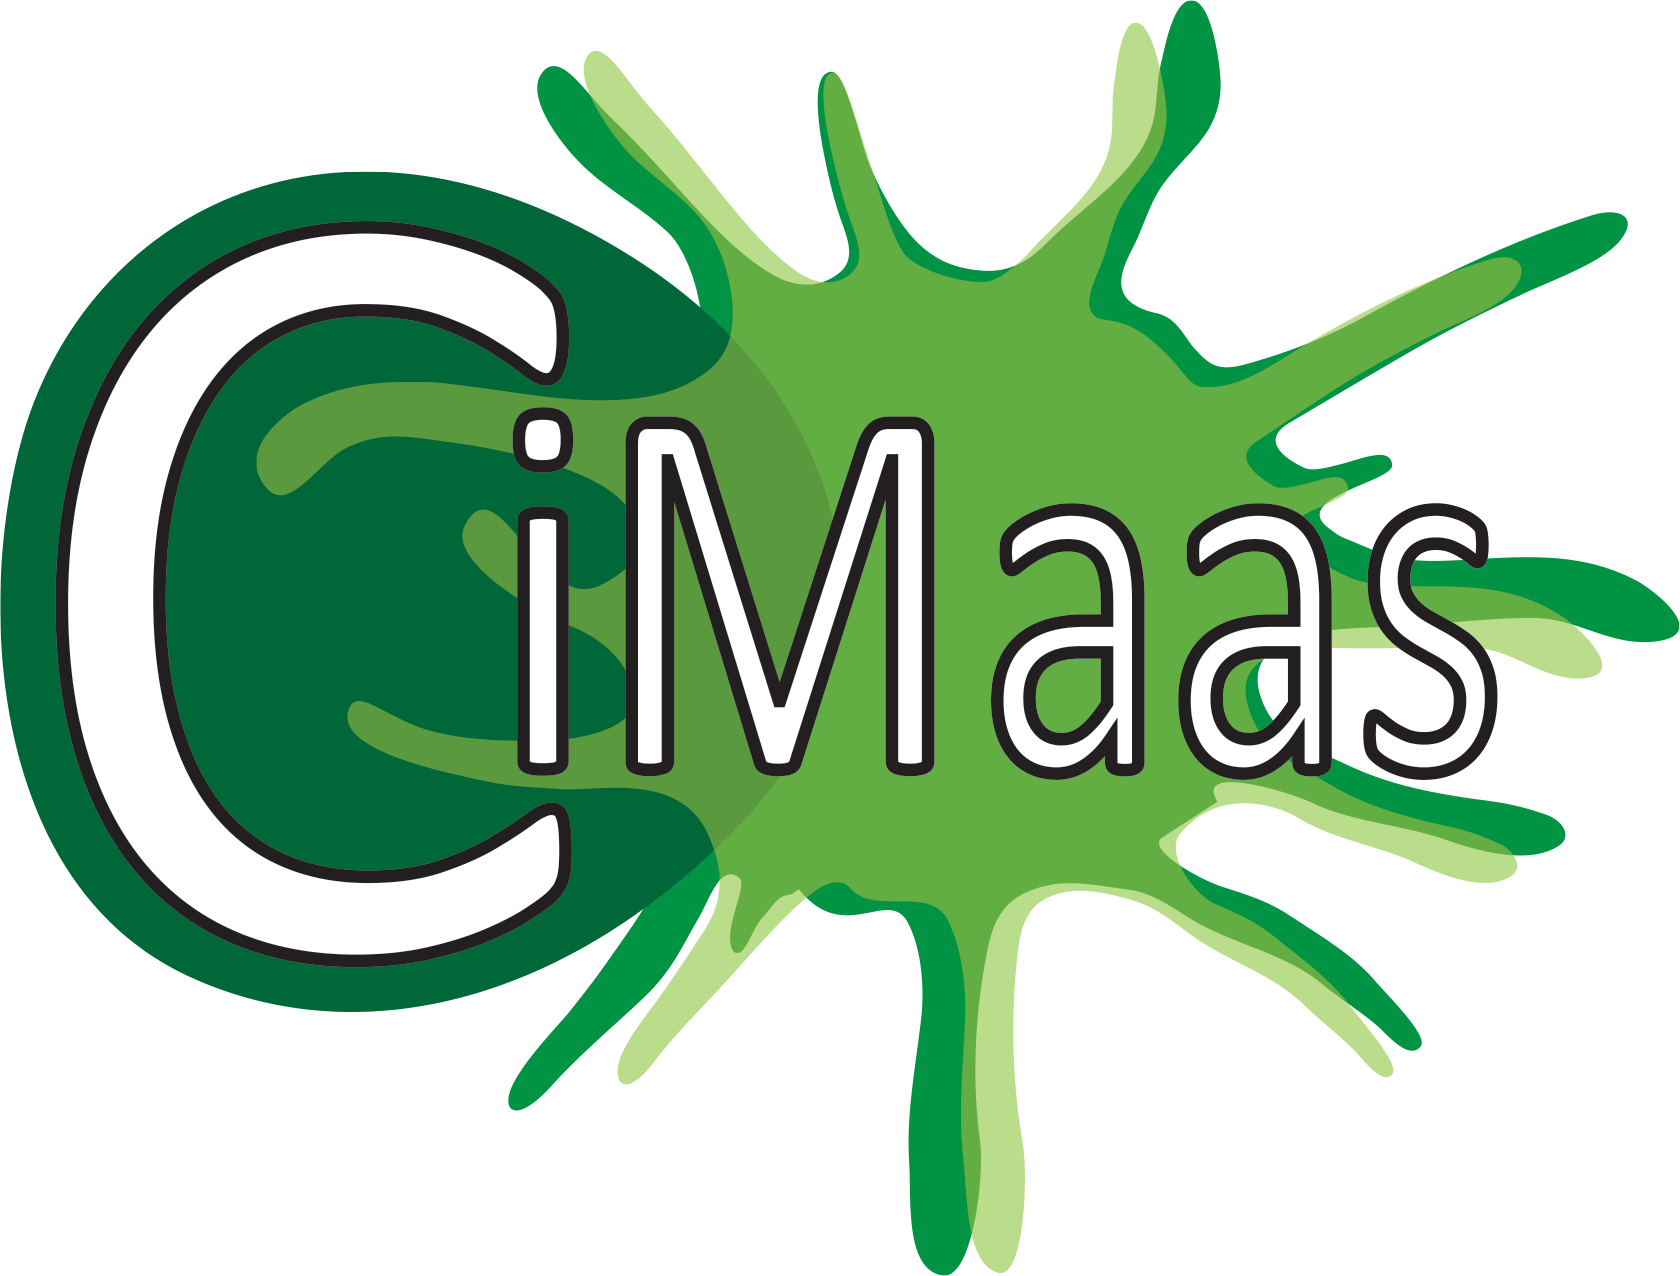 CiMaas and PharmaCell Enter a Collaborative Agreement